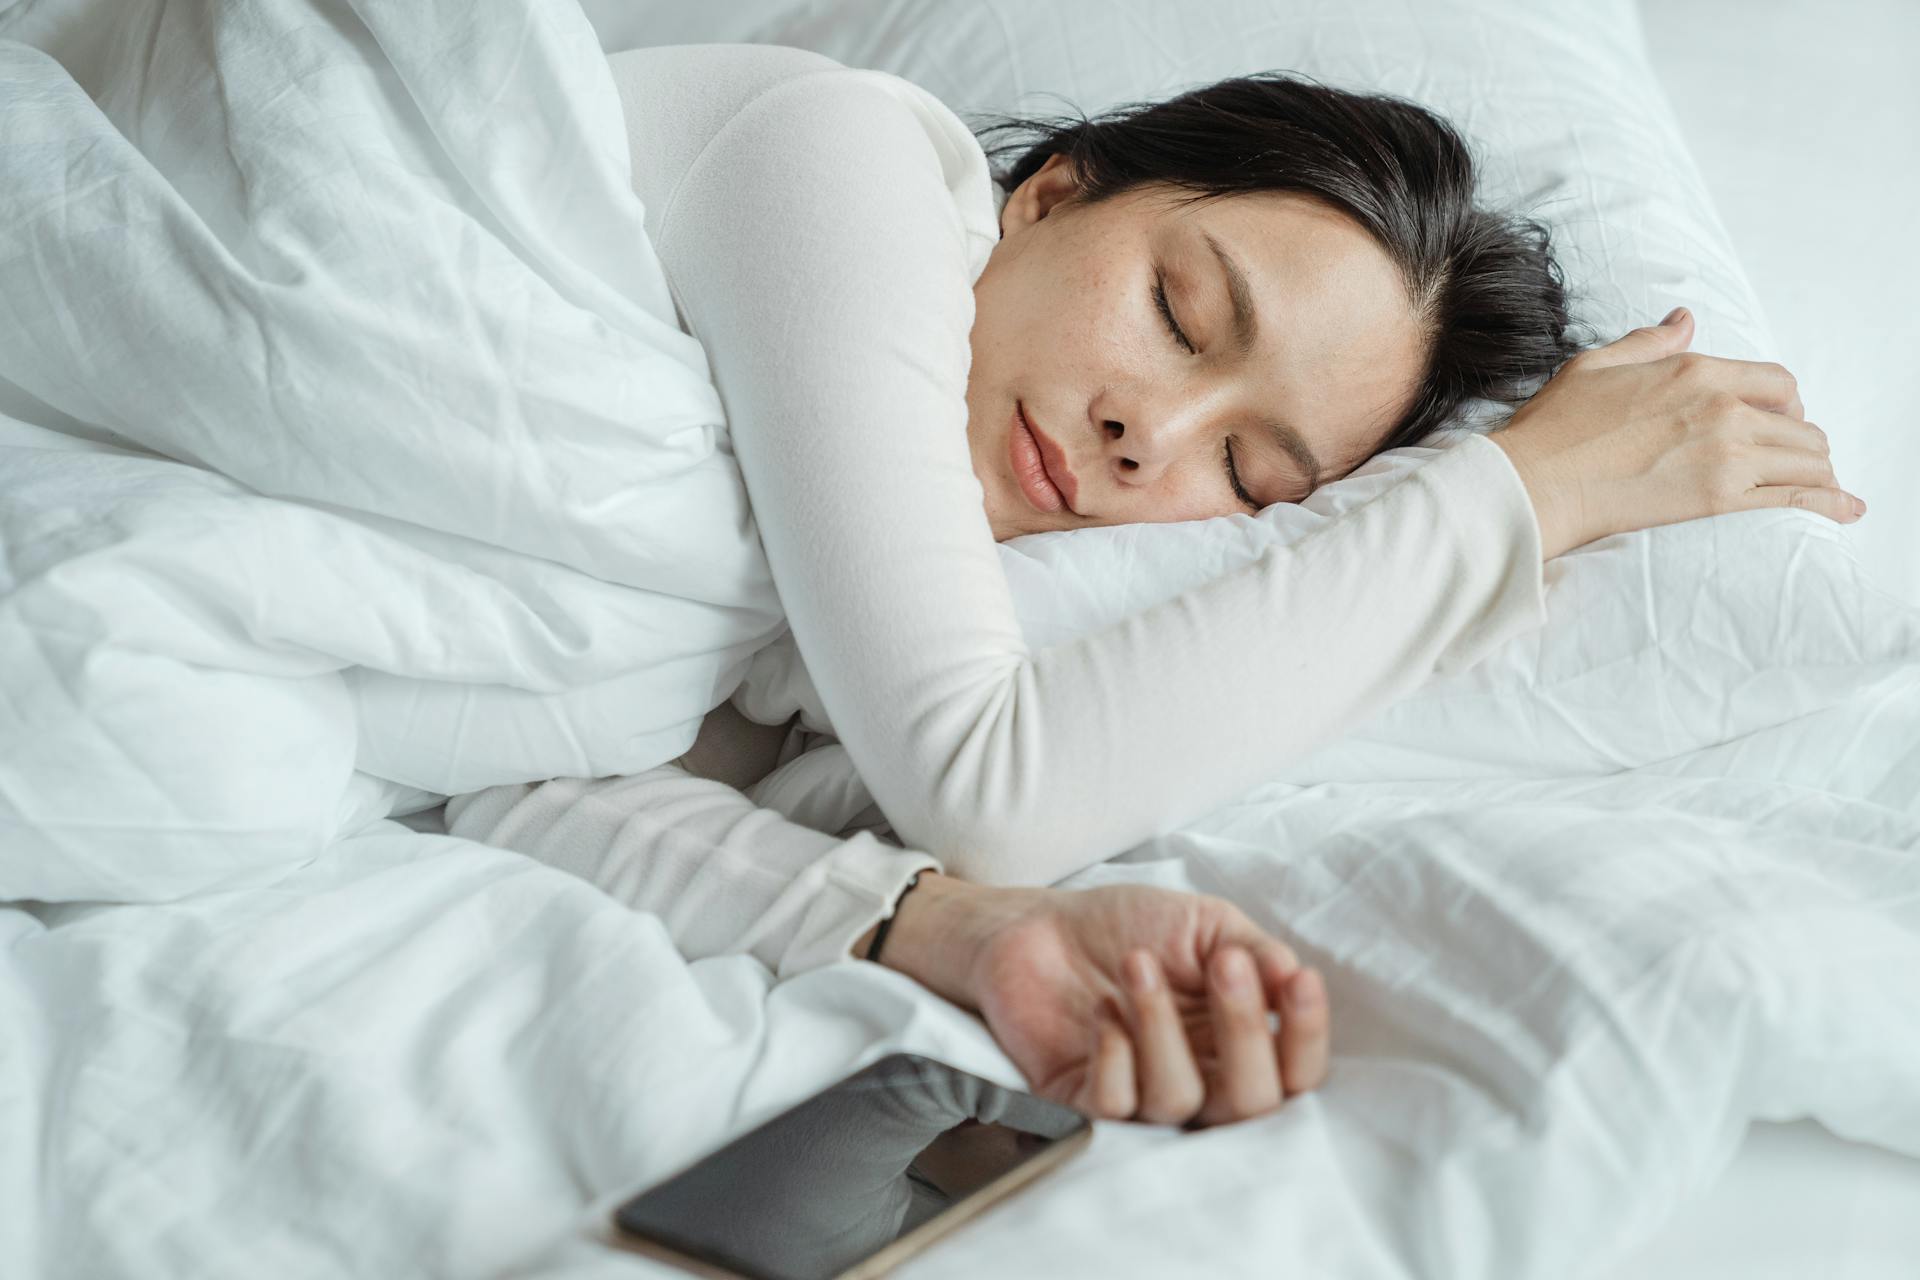 A woman sleeping with her phone next to her | Source: Pexels